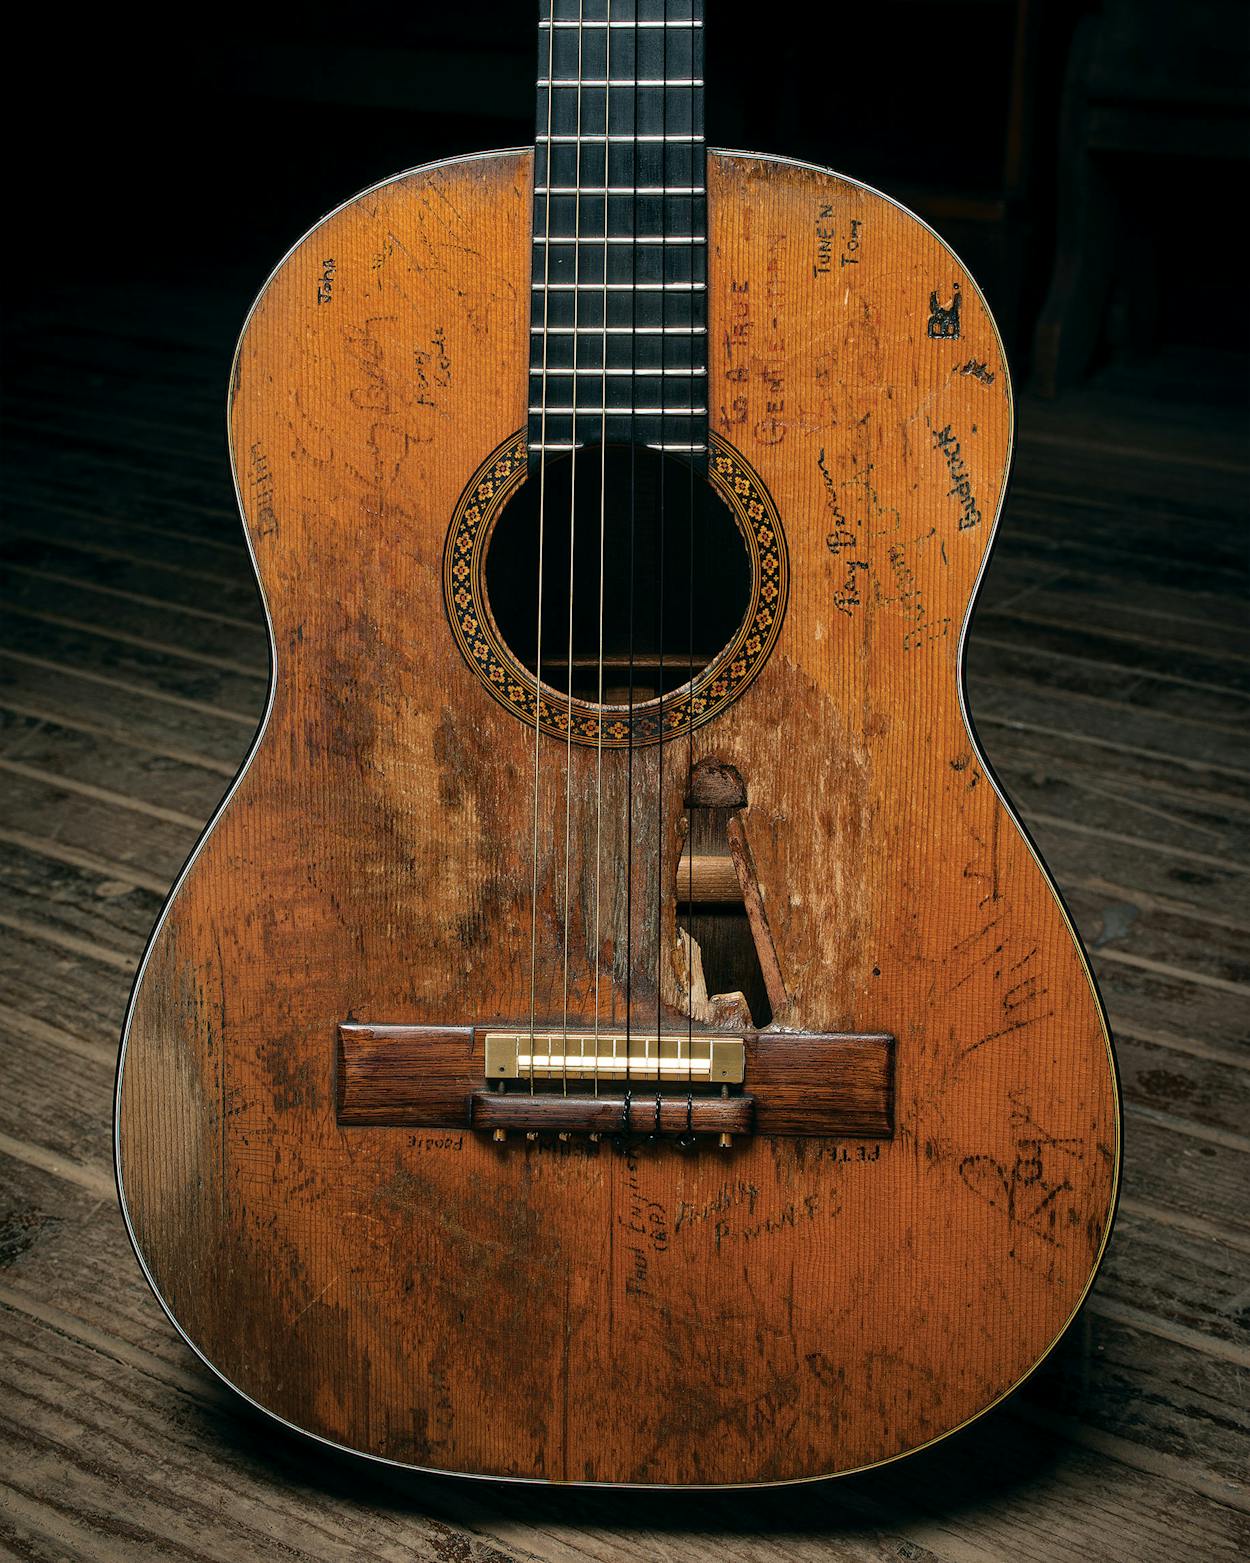 Willie Nelson's longtime guitar, Trigger, photographed at Nelson's ranch.